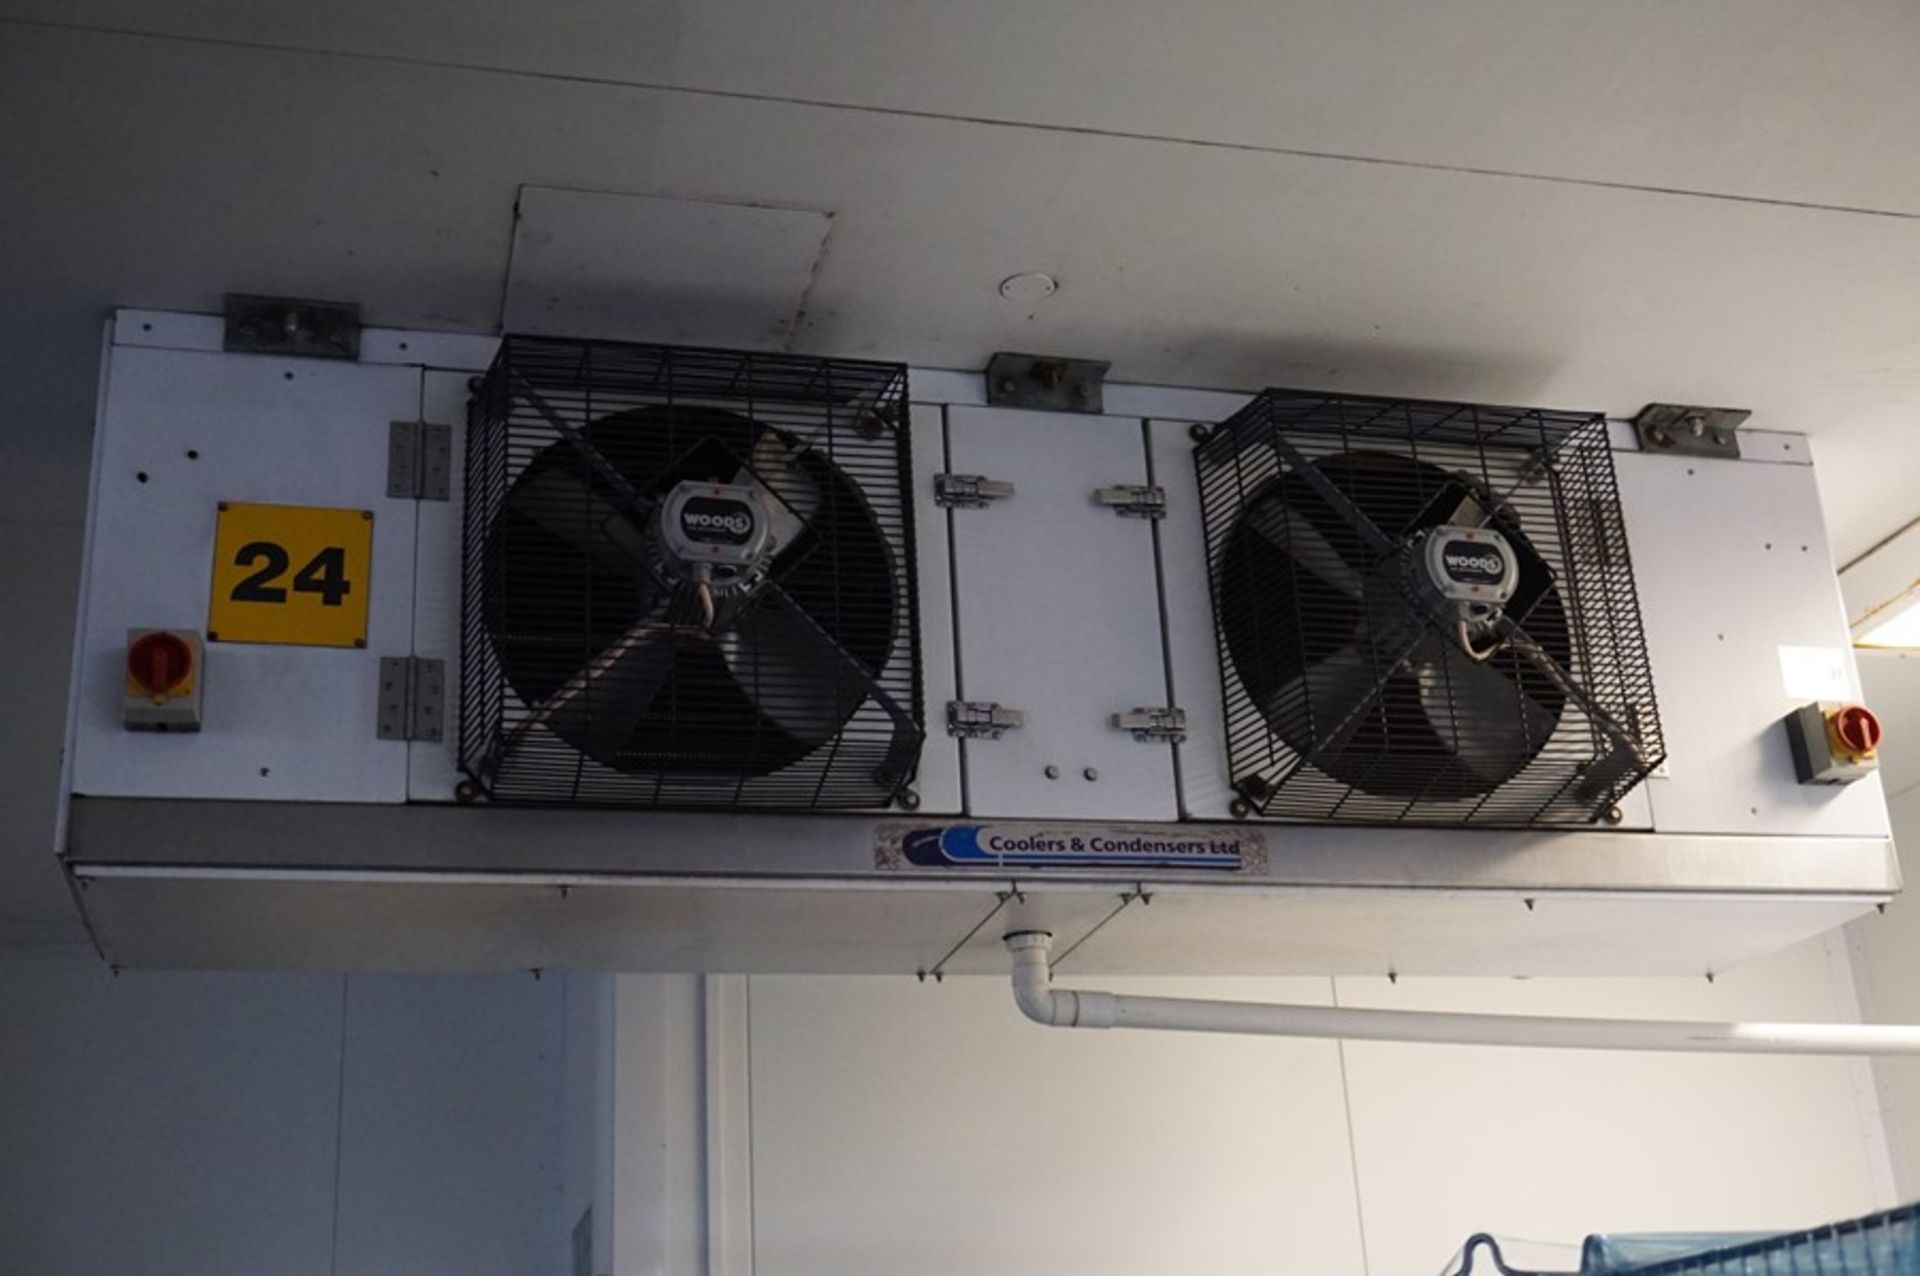 Coolers & Condensers, Model: CA10, twin fan chiller unit, Serial No. SOP009219 (1998) (Lift out